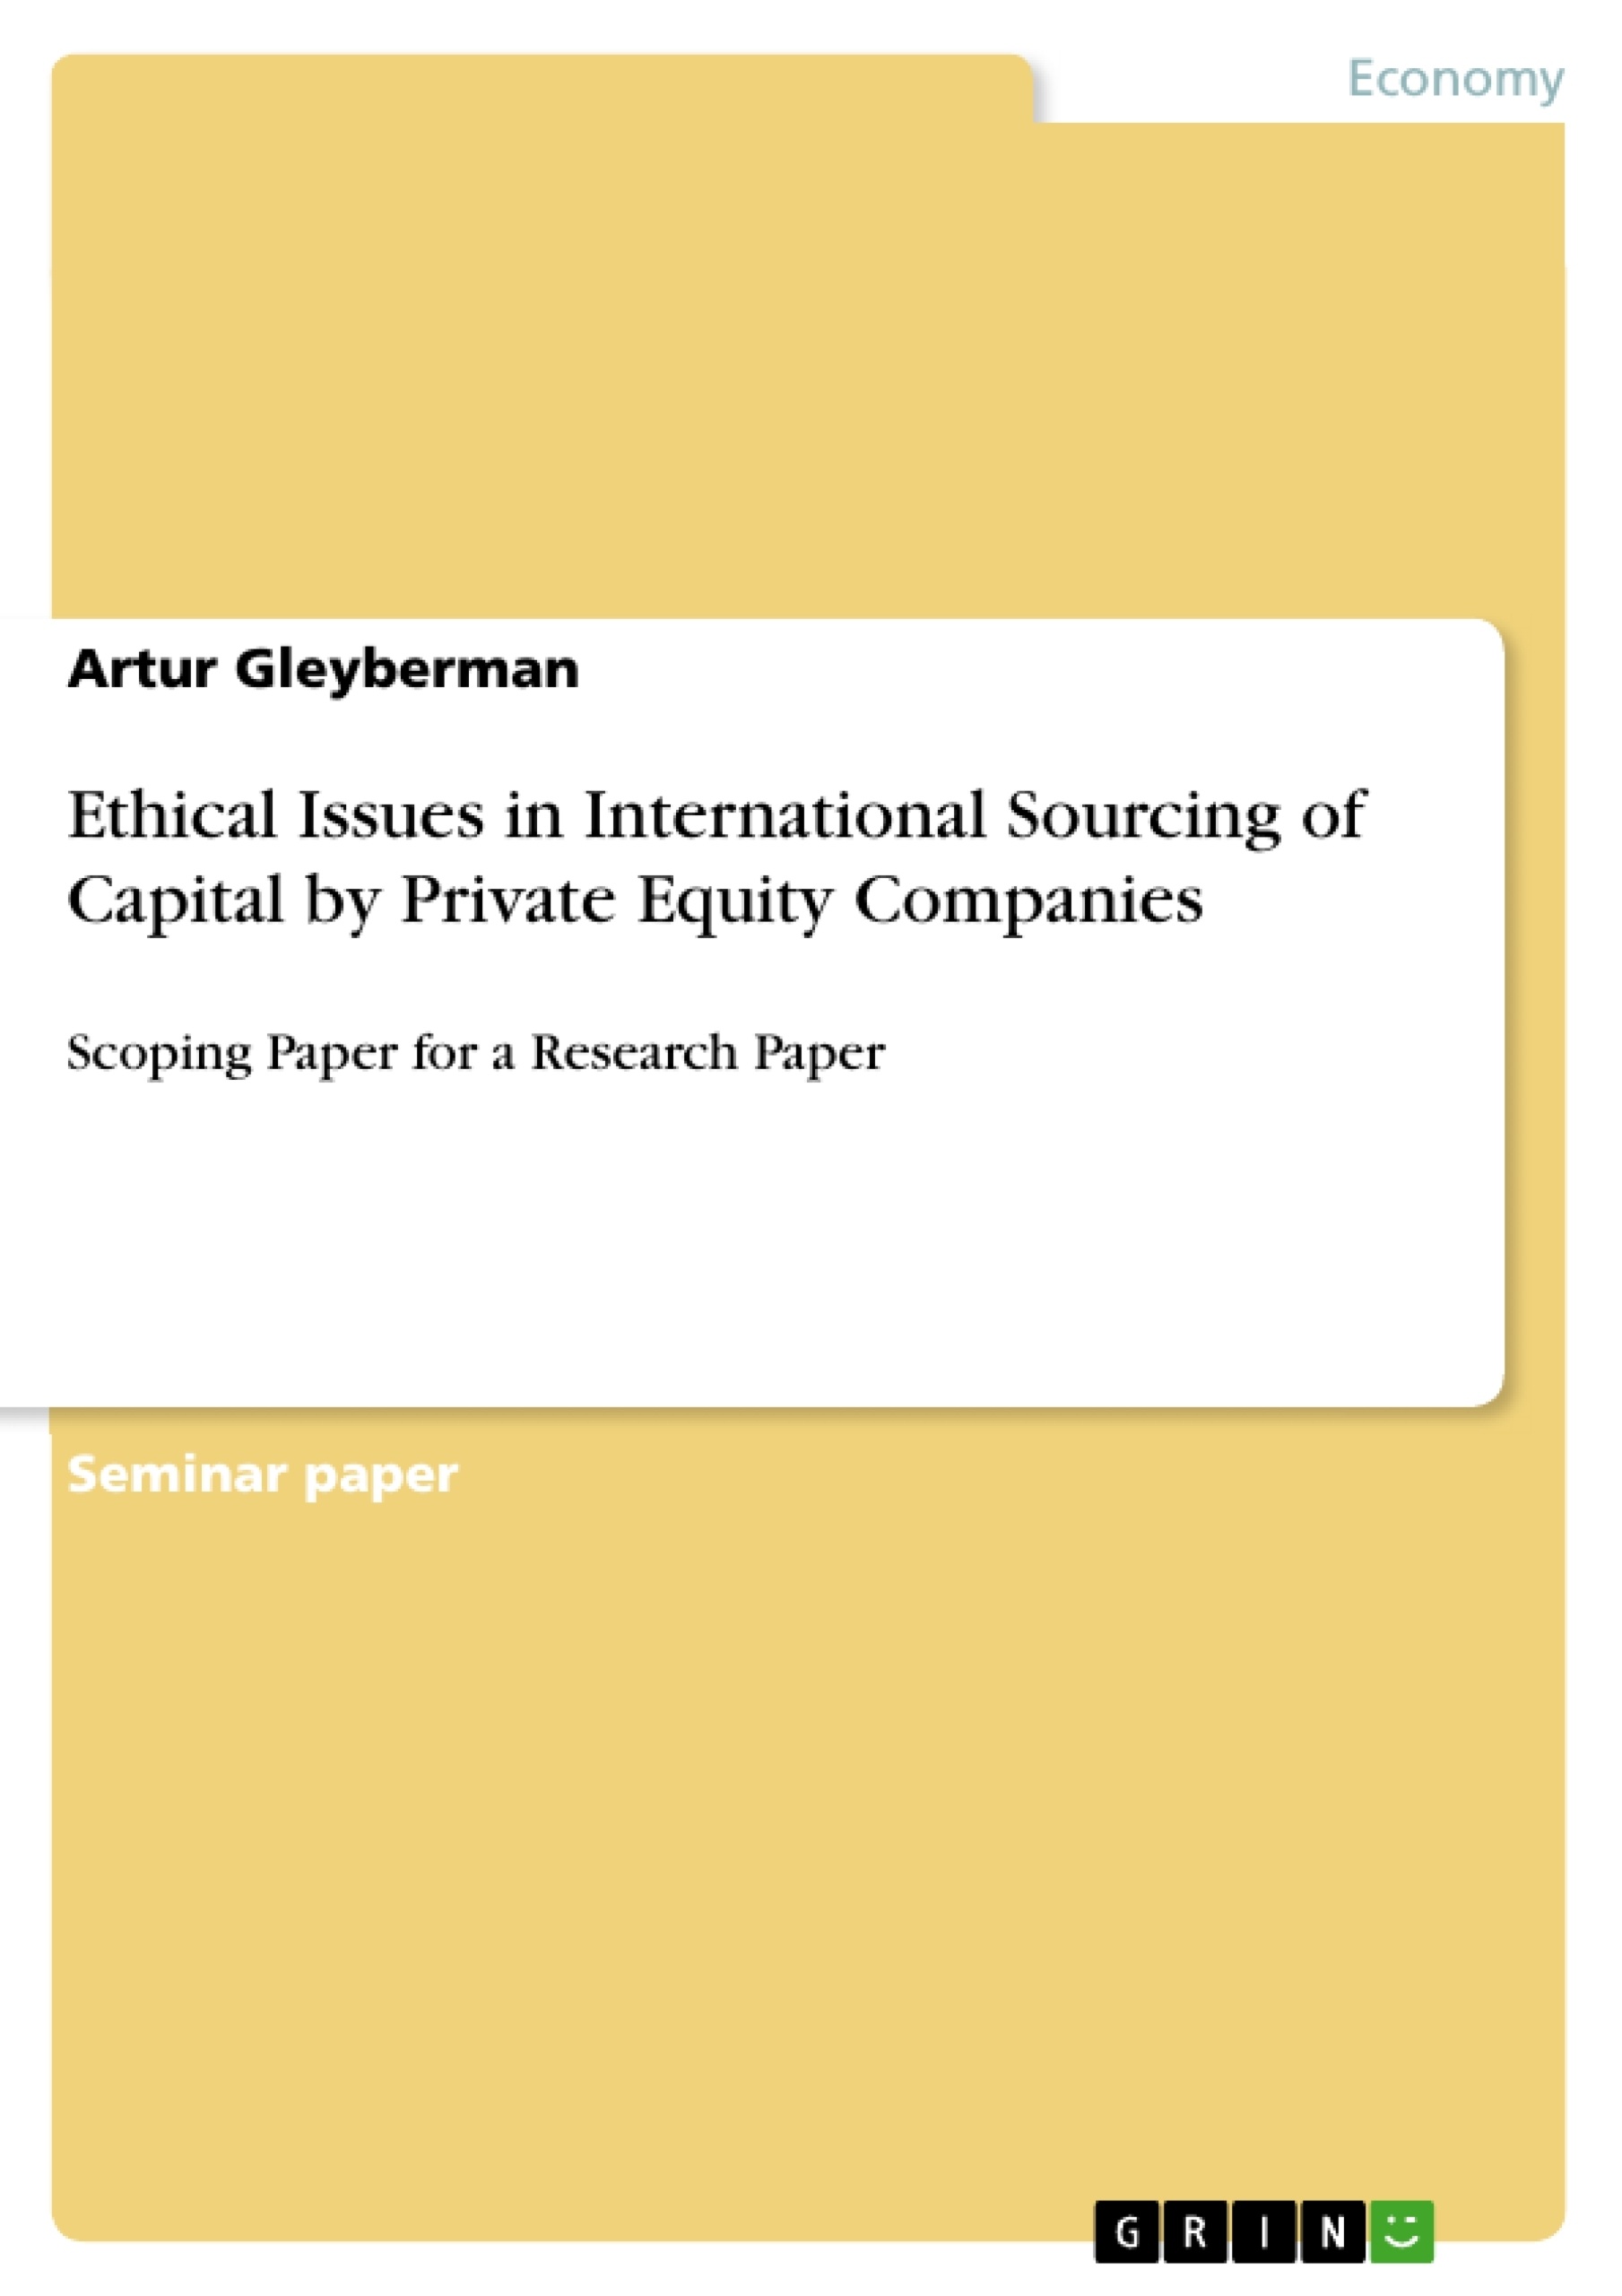 Title: Ethical Issues in International Sourcing of Capital by Private Equity Companies